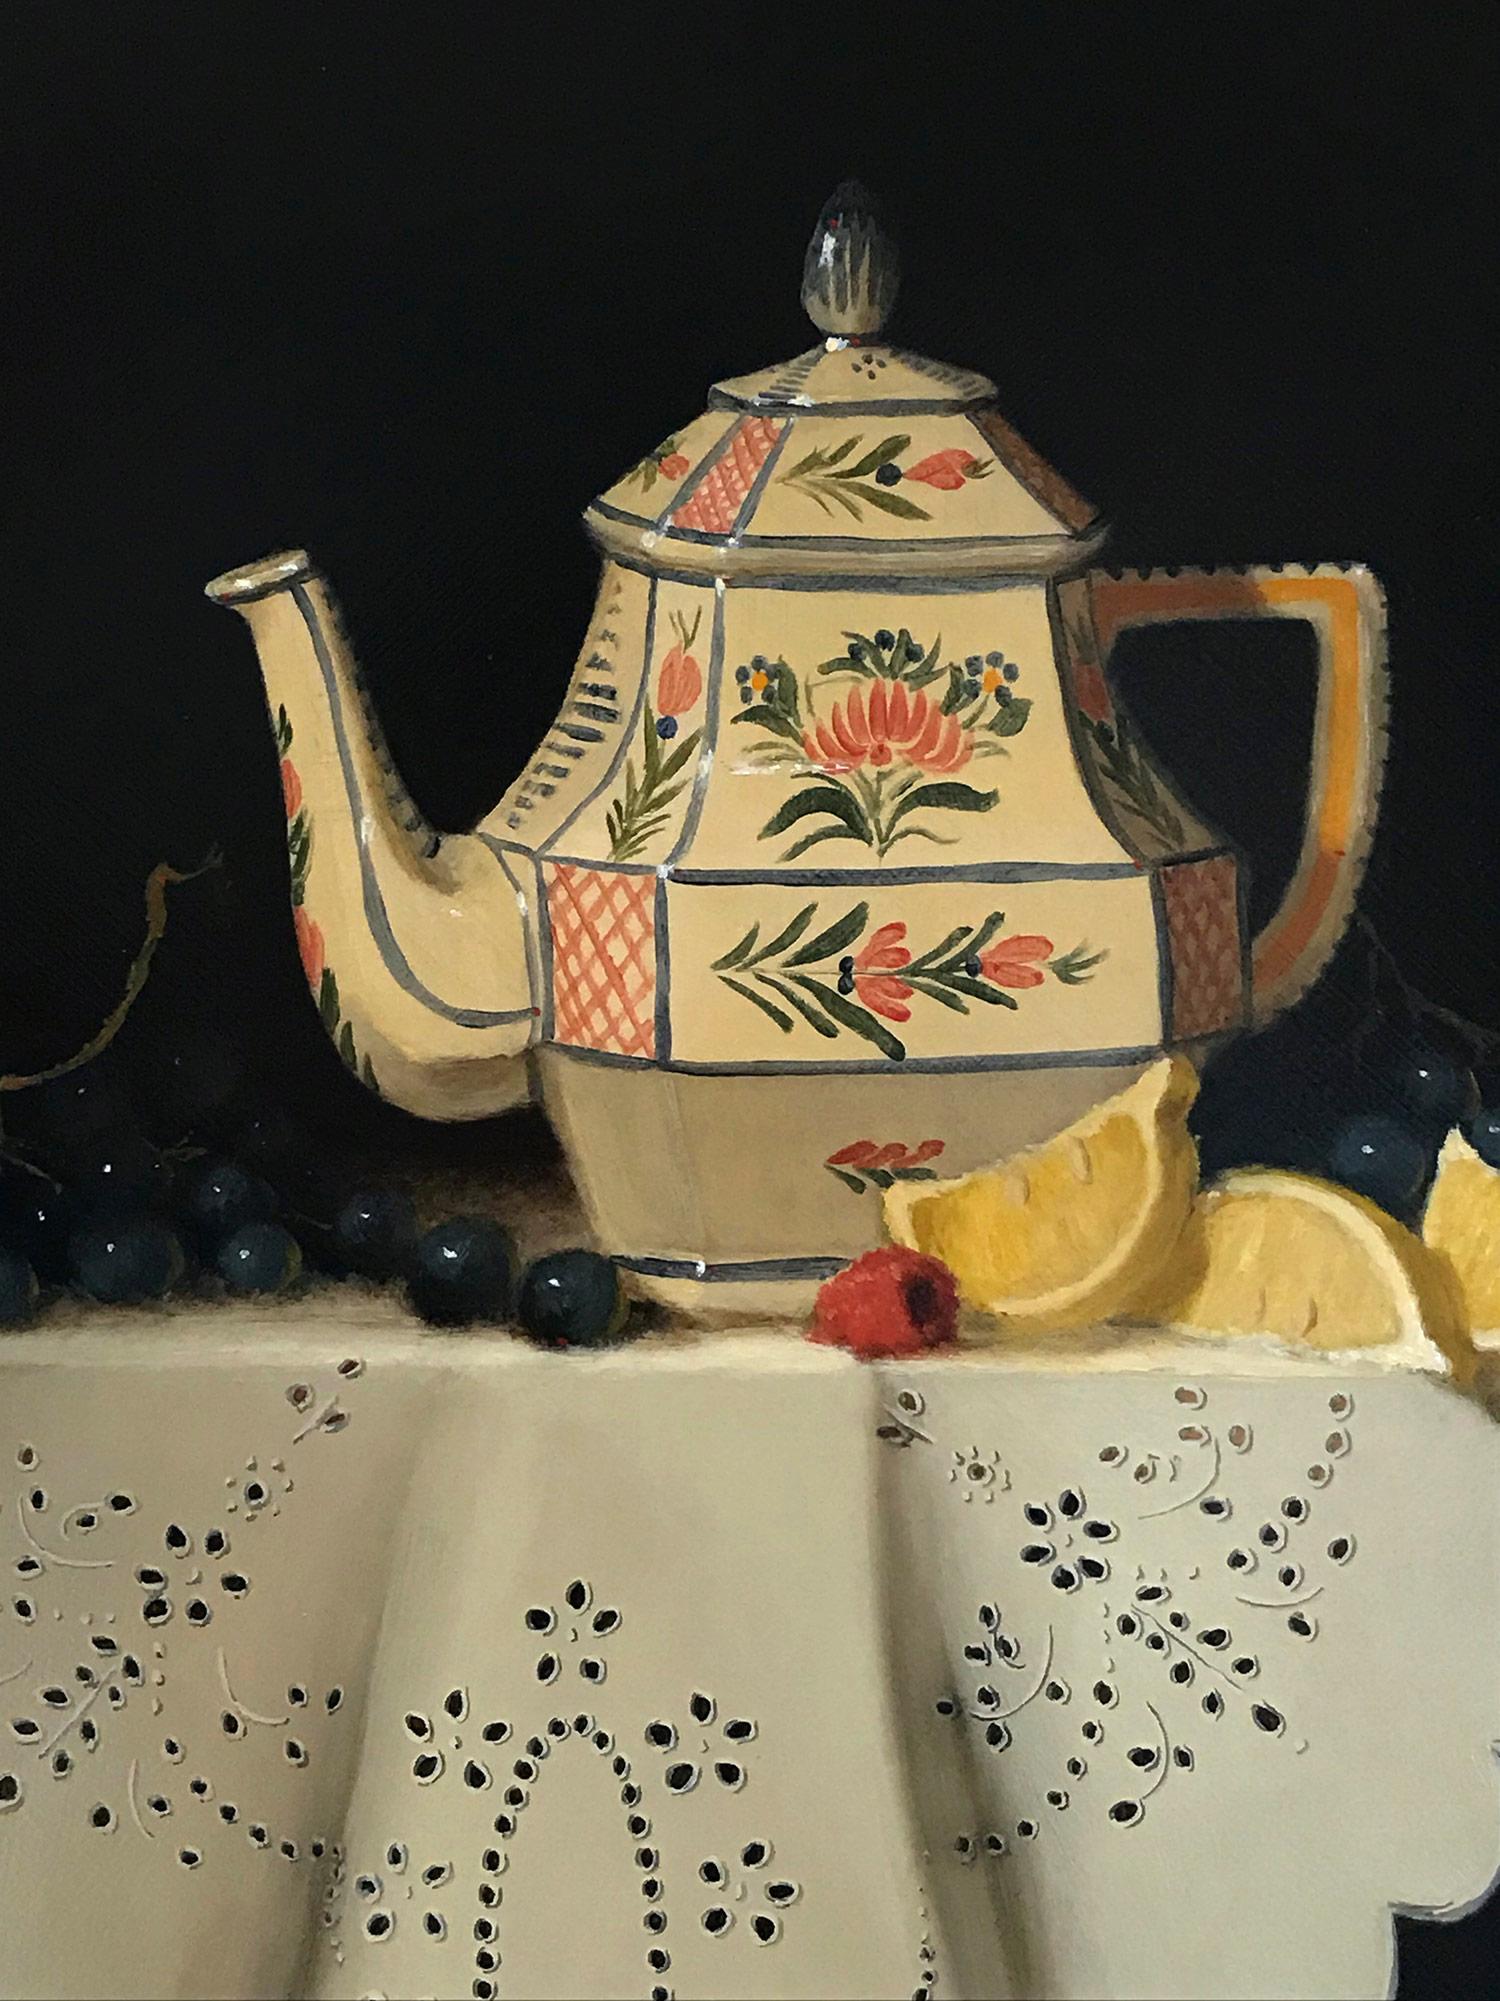 A luminous still life that borrows themes from Dutch 17th Century Masters, we are drawn to the very details that Beirne captures effortlessly. The subdued, yet boldness of the colors represent an interesting arrangement throughout. This painting